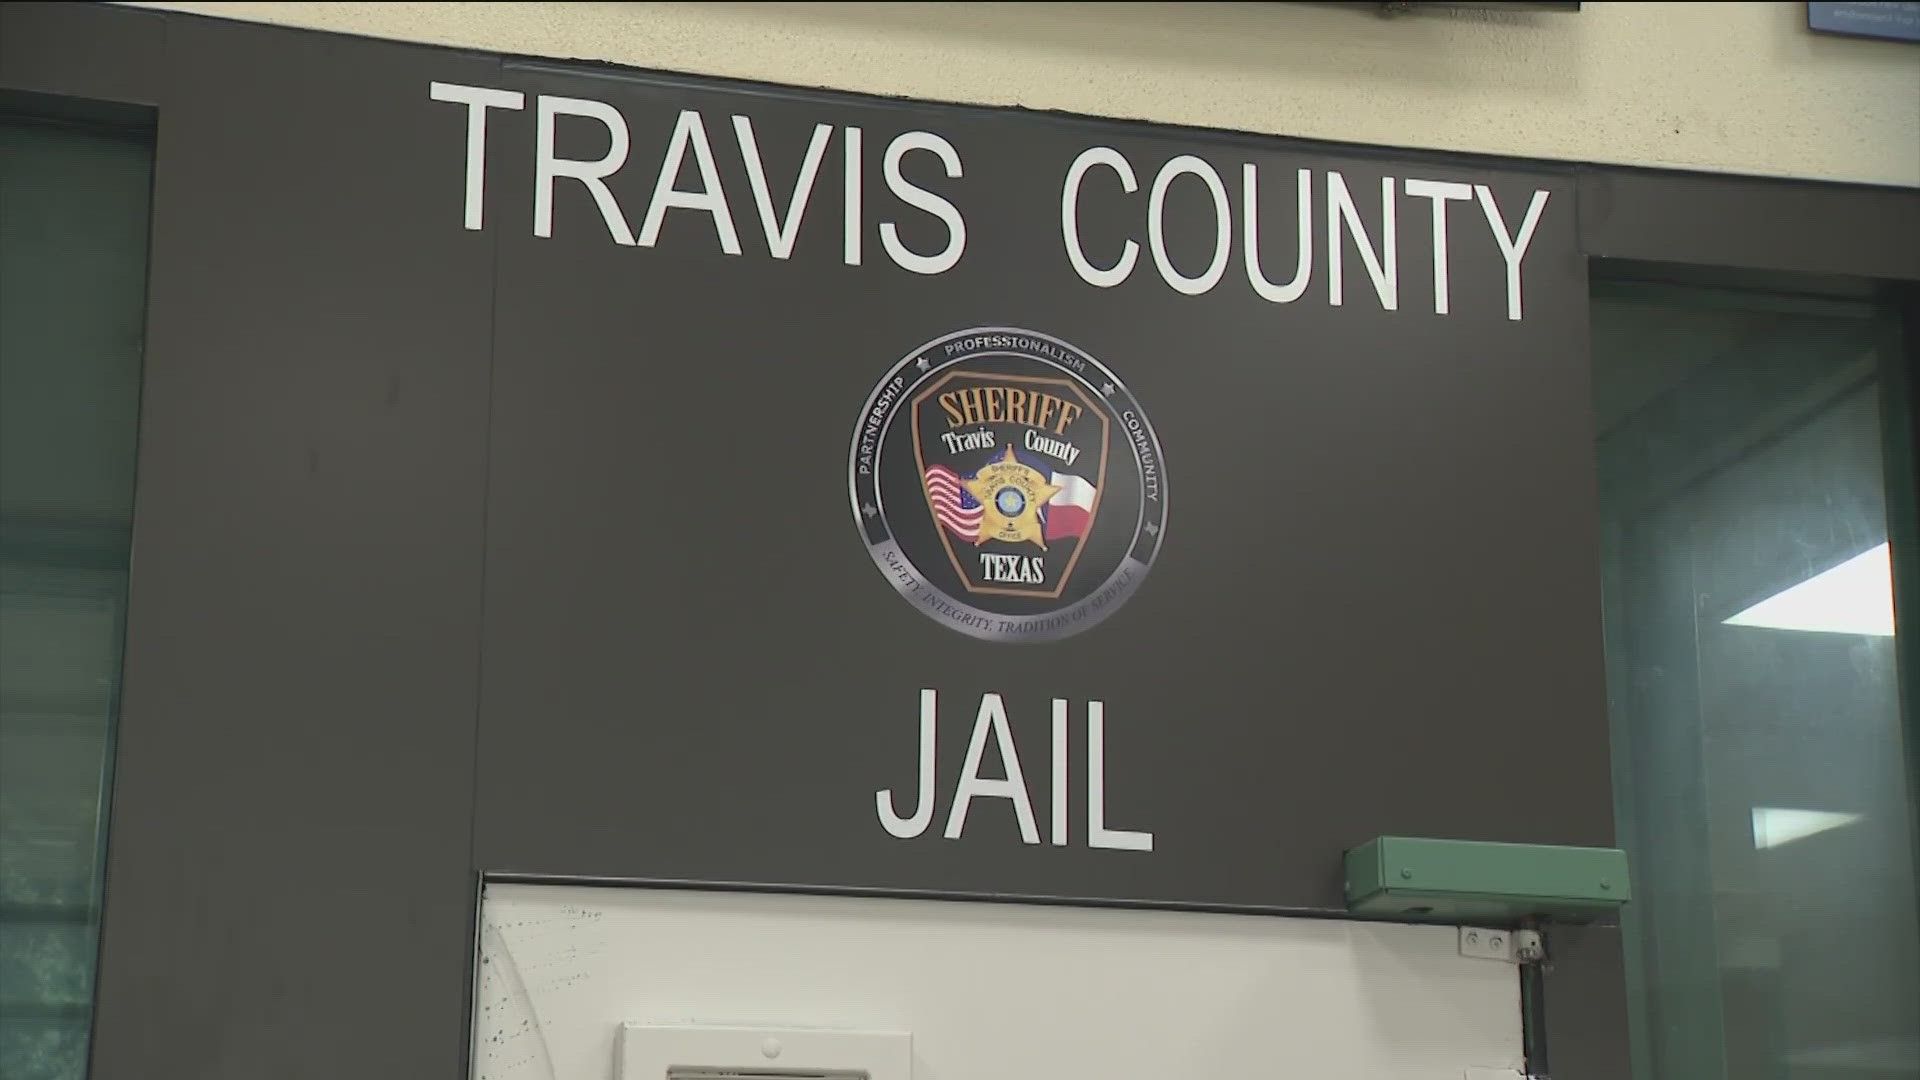 Travis County Commissioners unanimously approved a resolution that directs staff to find locations and funding for a new Central Booking and Diversion Center.